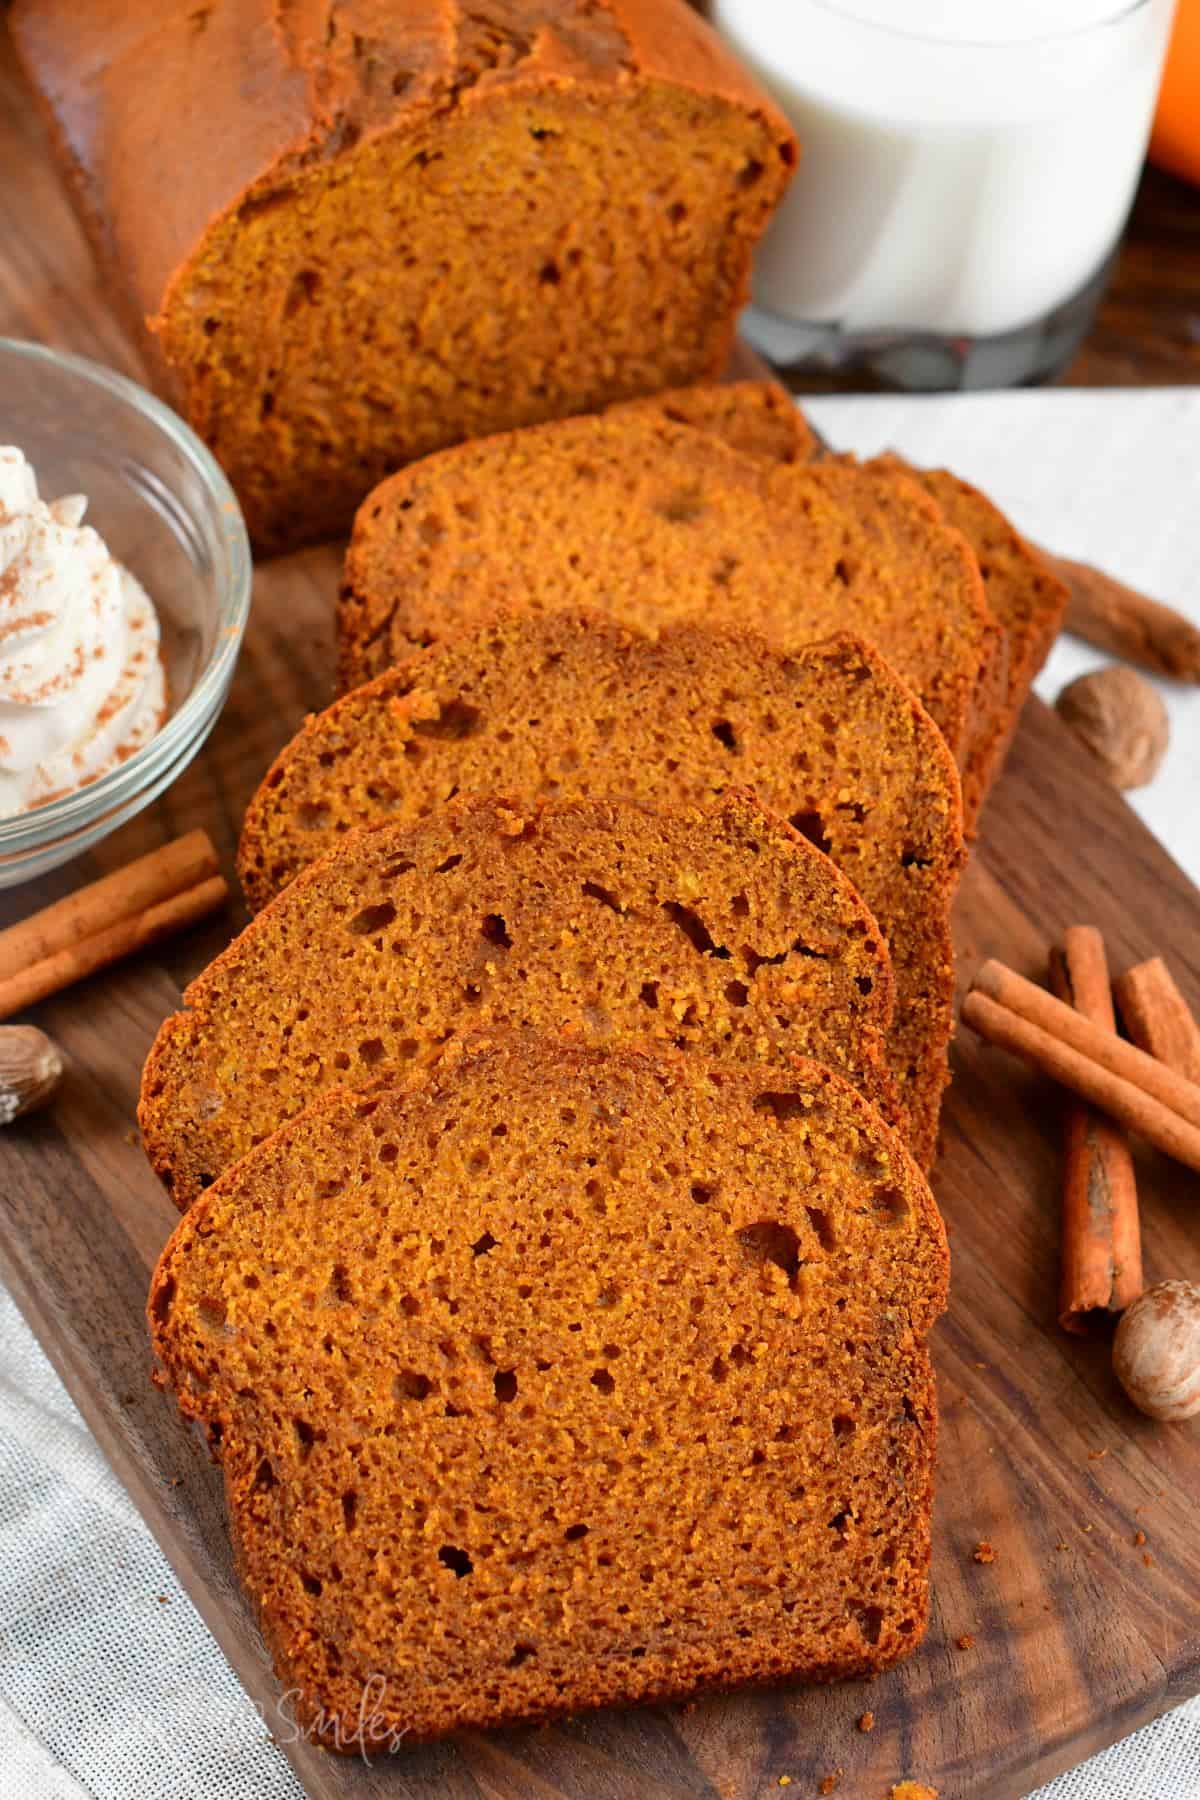 slices of pumpkin bread on a wood surface with cinnamon sticks next to it.